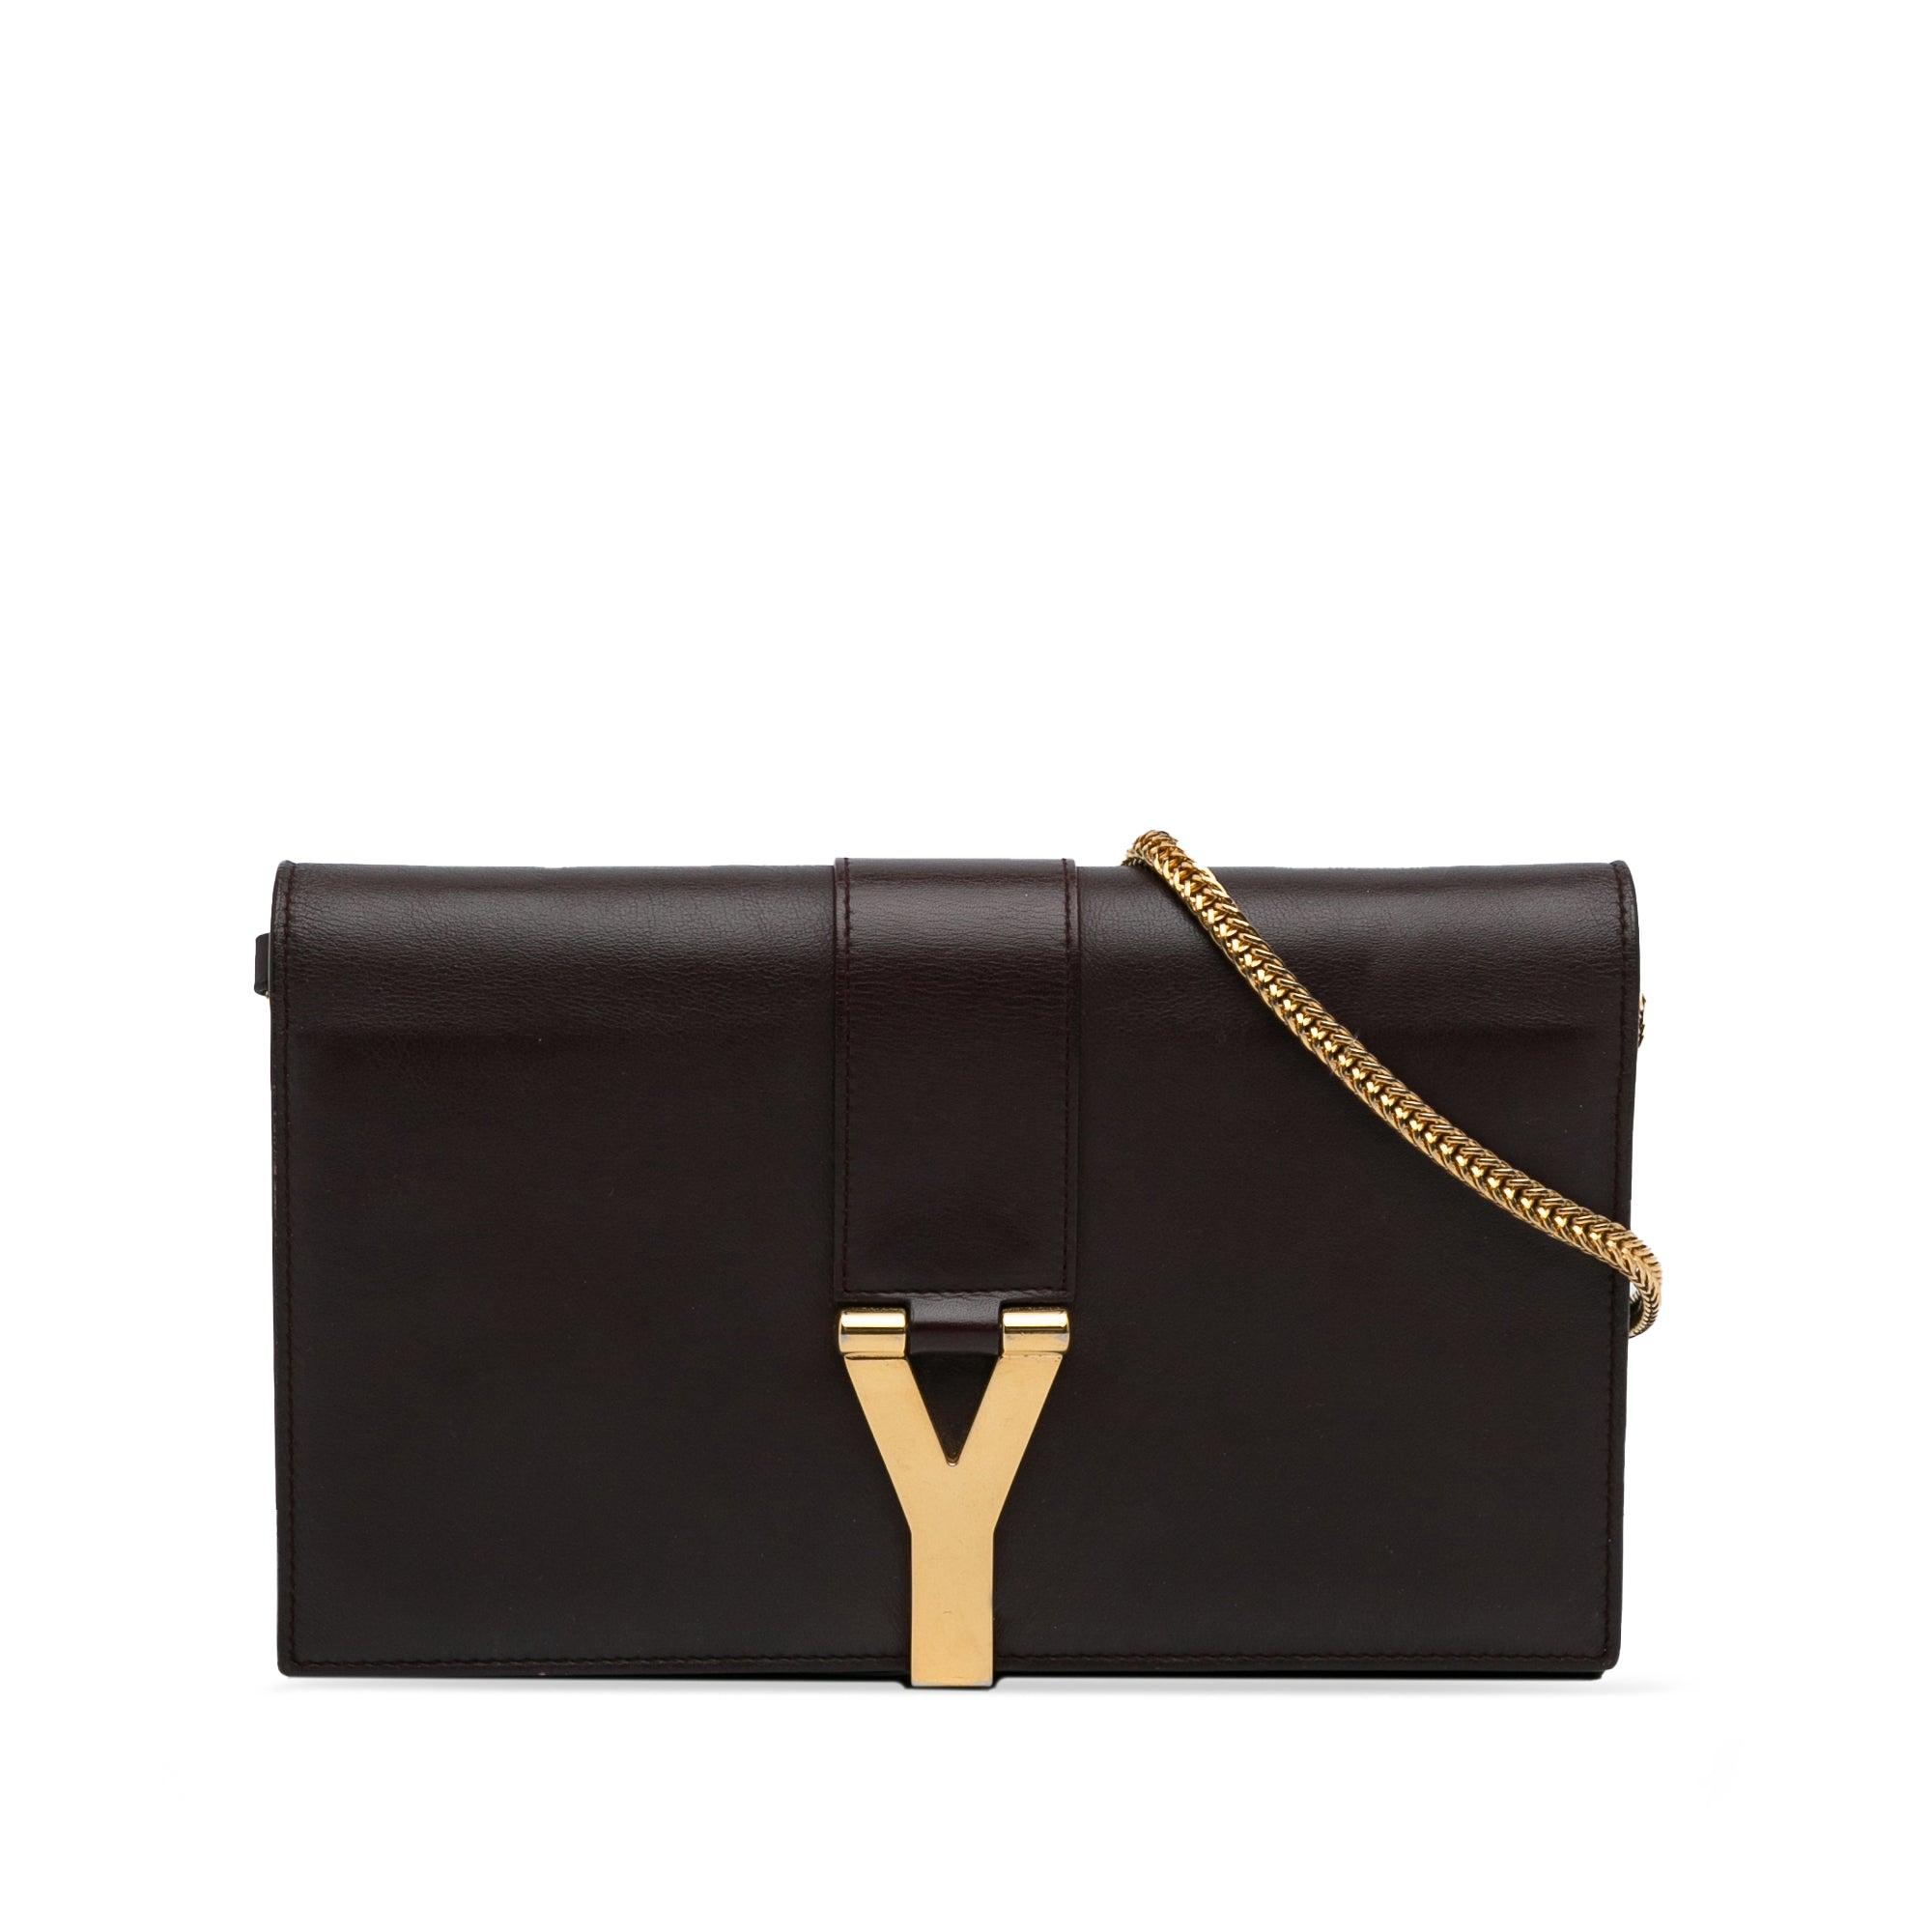 Yves Saint Laurent Chyc Ligne Wallet on Chain Brown